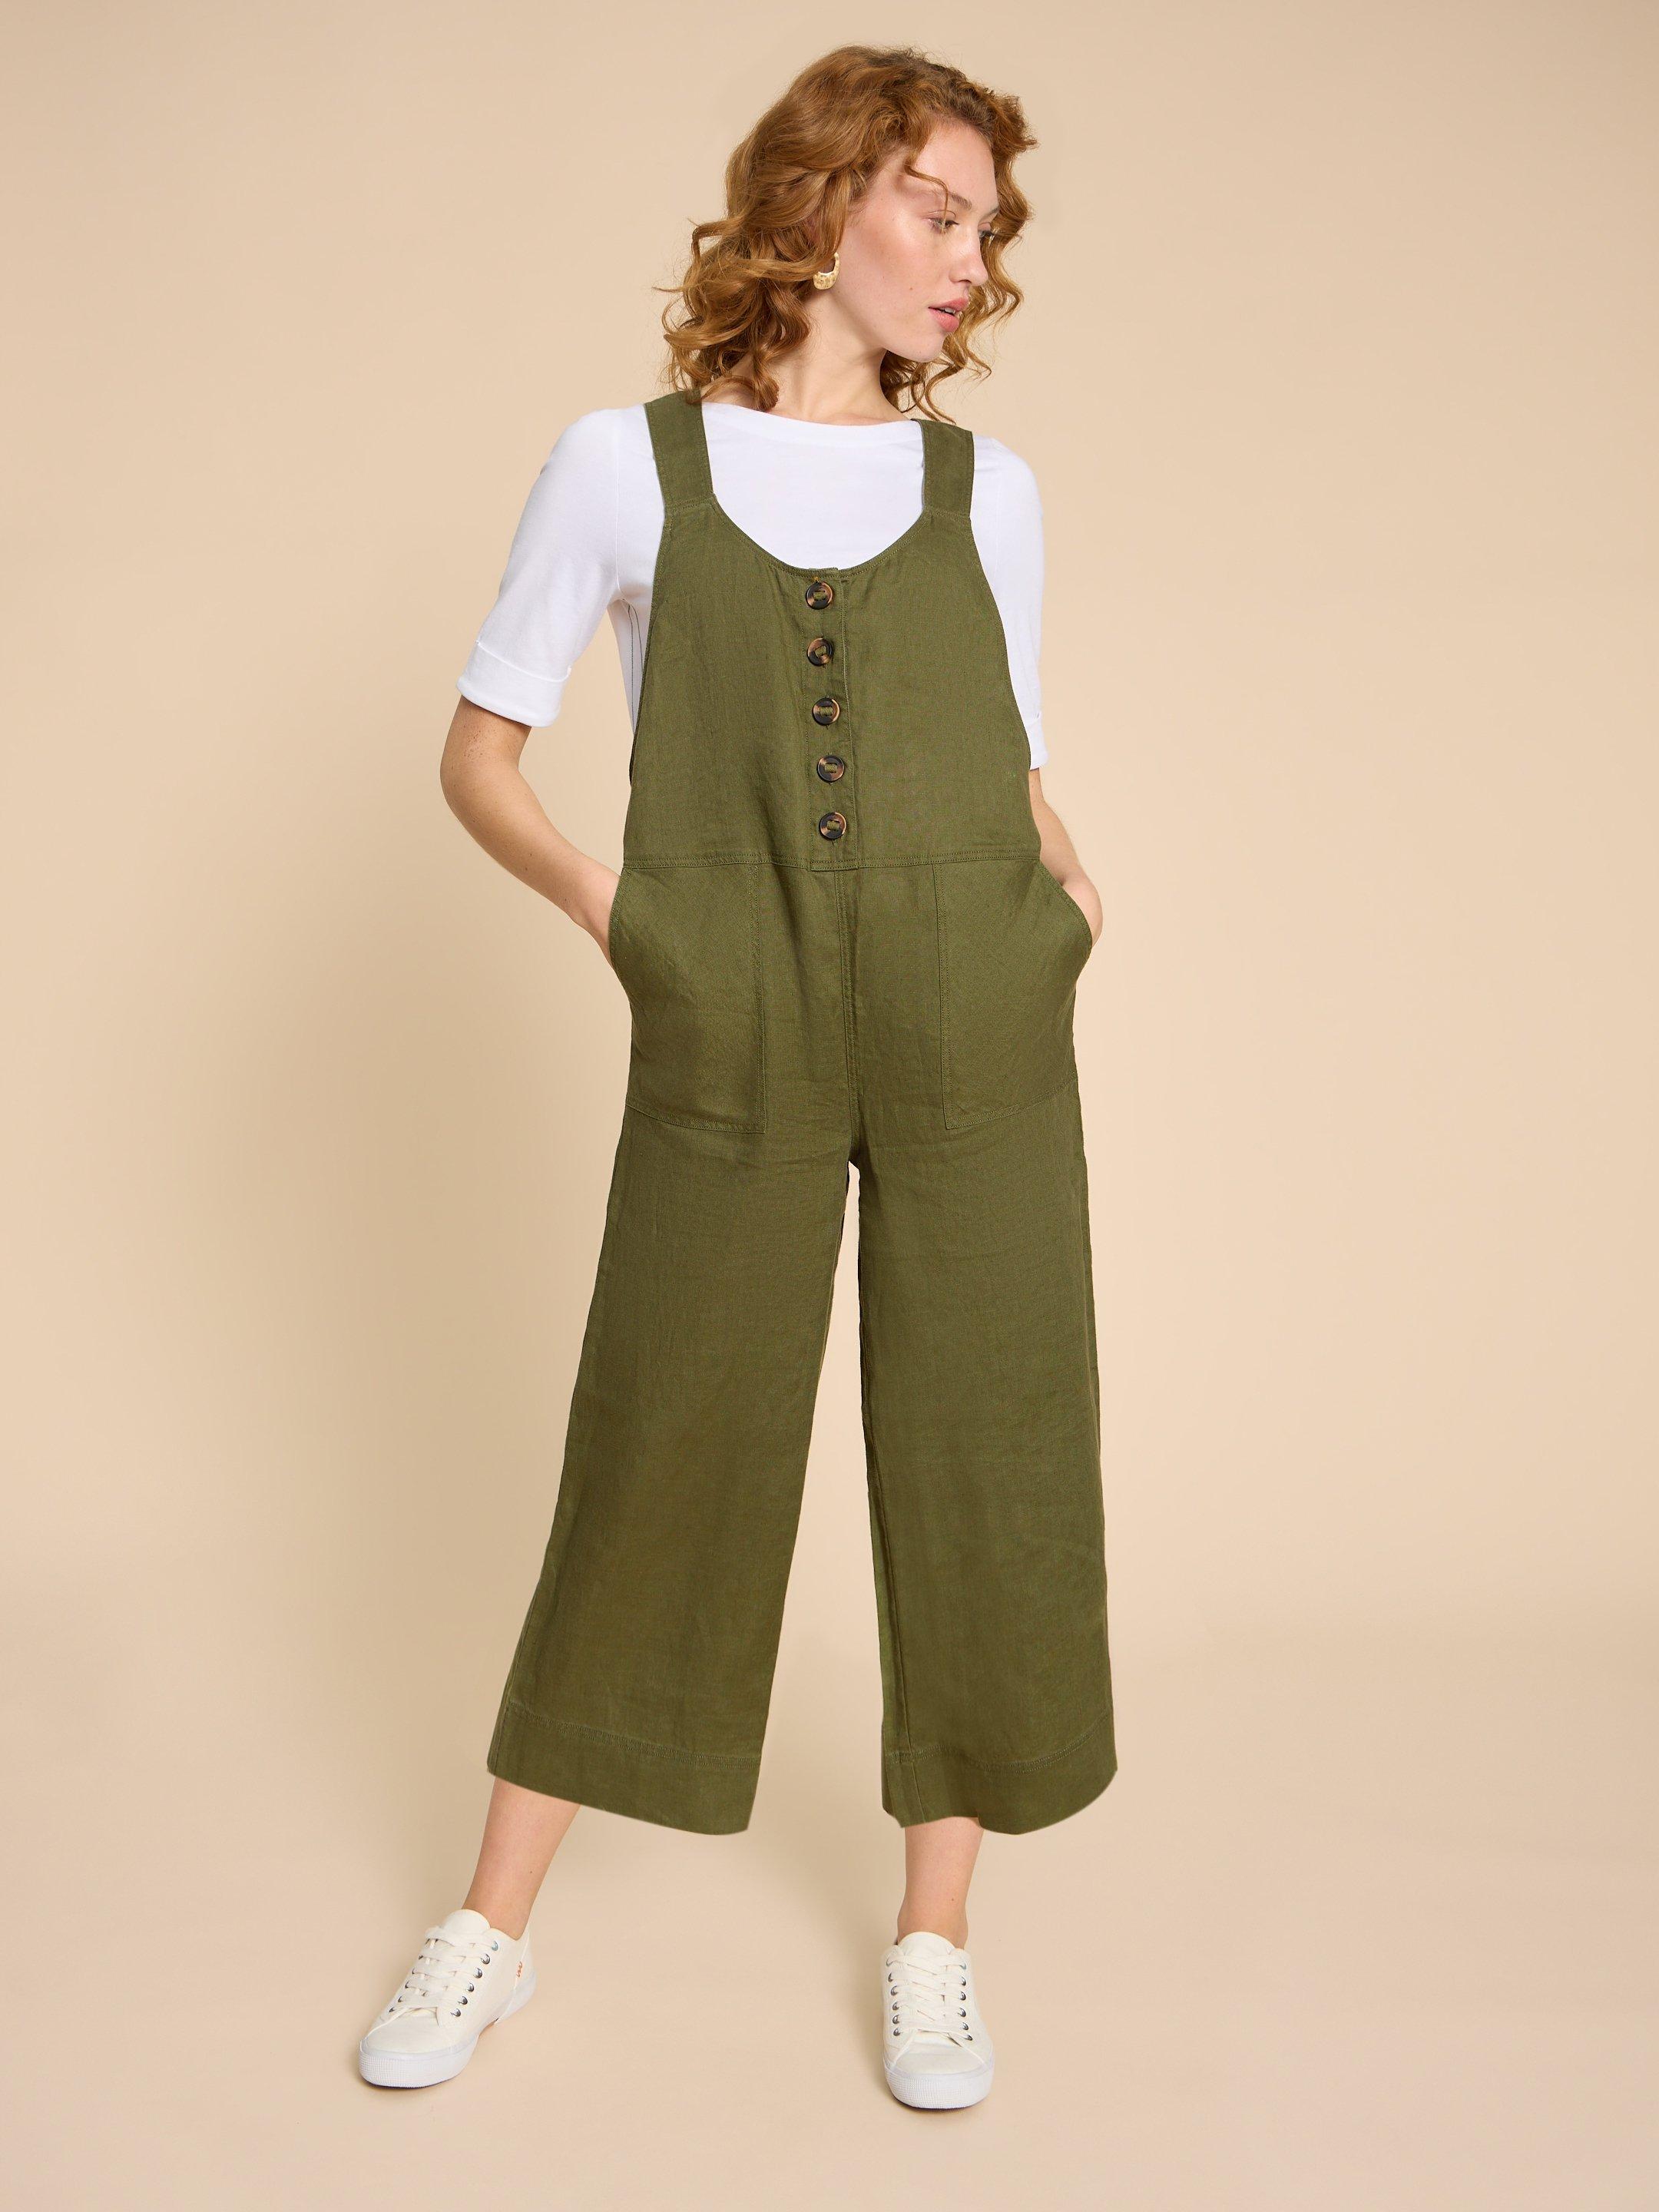 White Stuff Dahlia Dungarees by Ohh By Gum